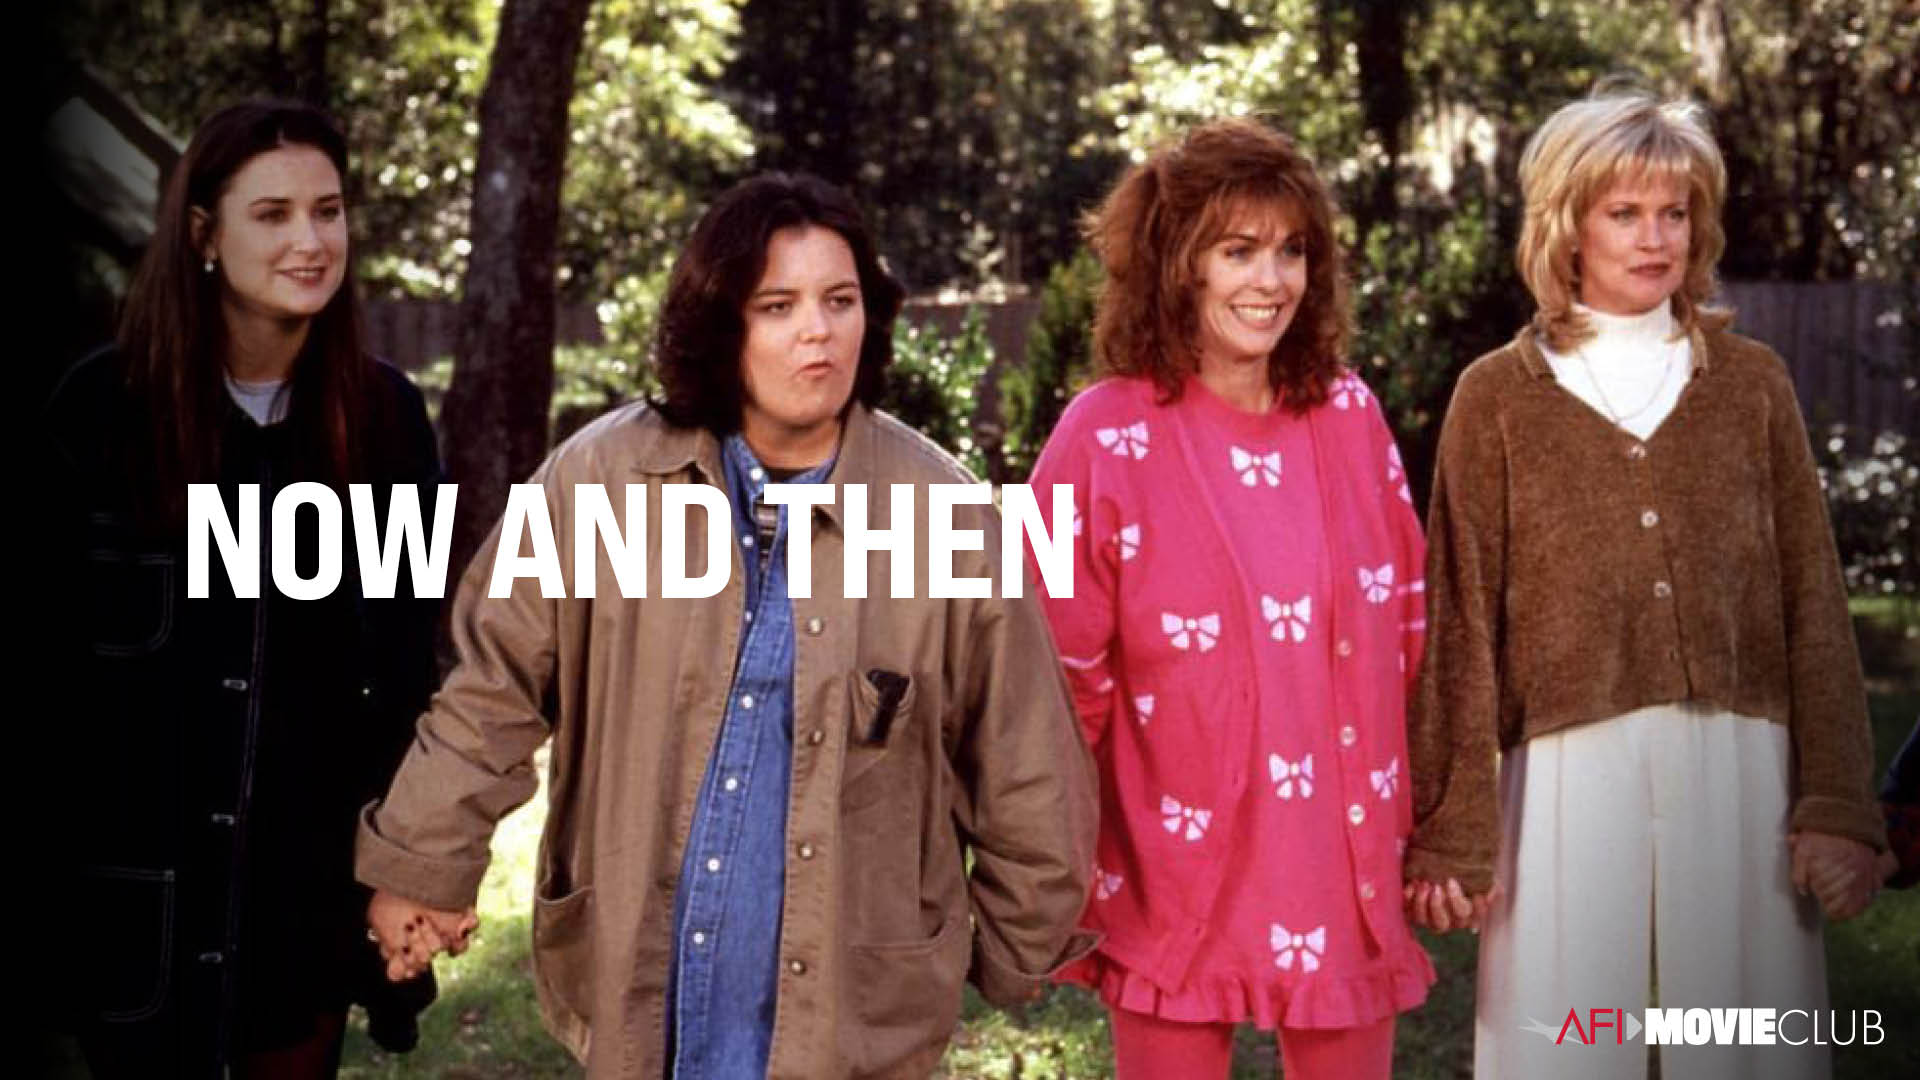 Now and Then Film Still - Demi Moore, Melanie Griffith, Rita Wilson, and Rosie O'Donnell